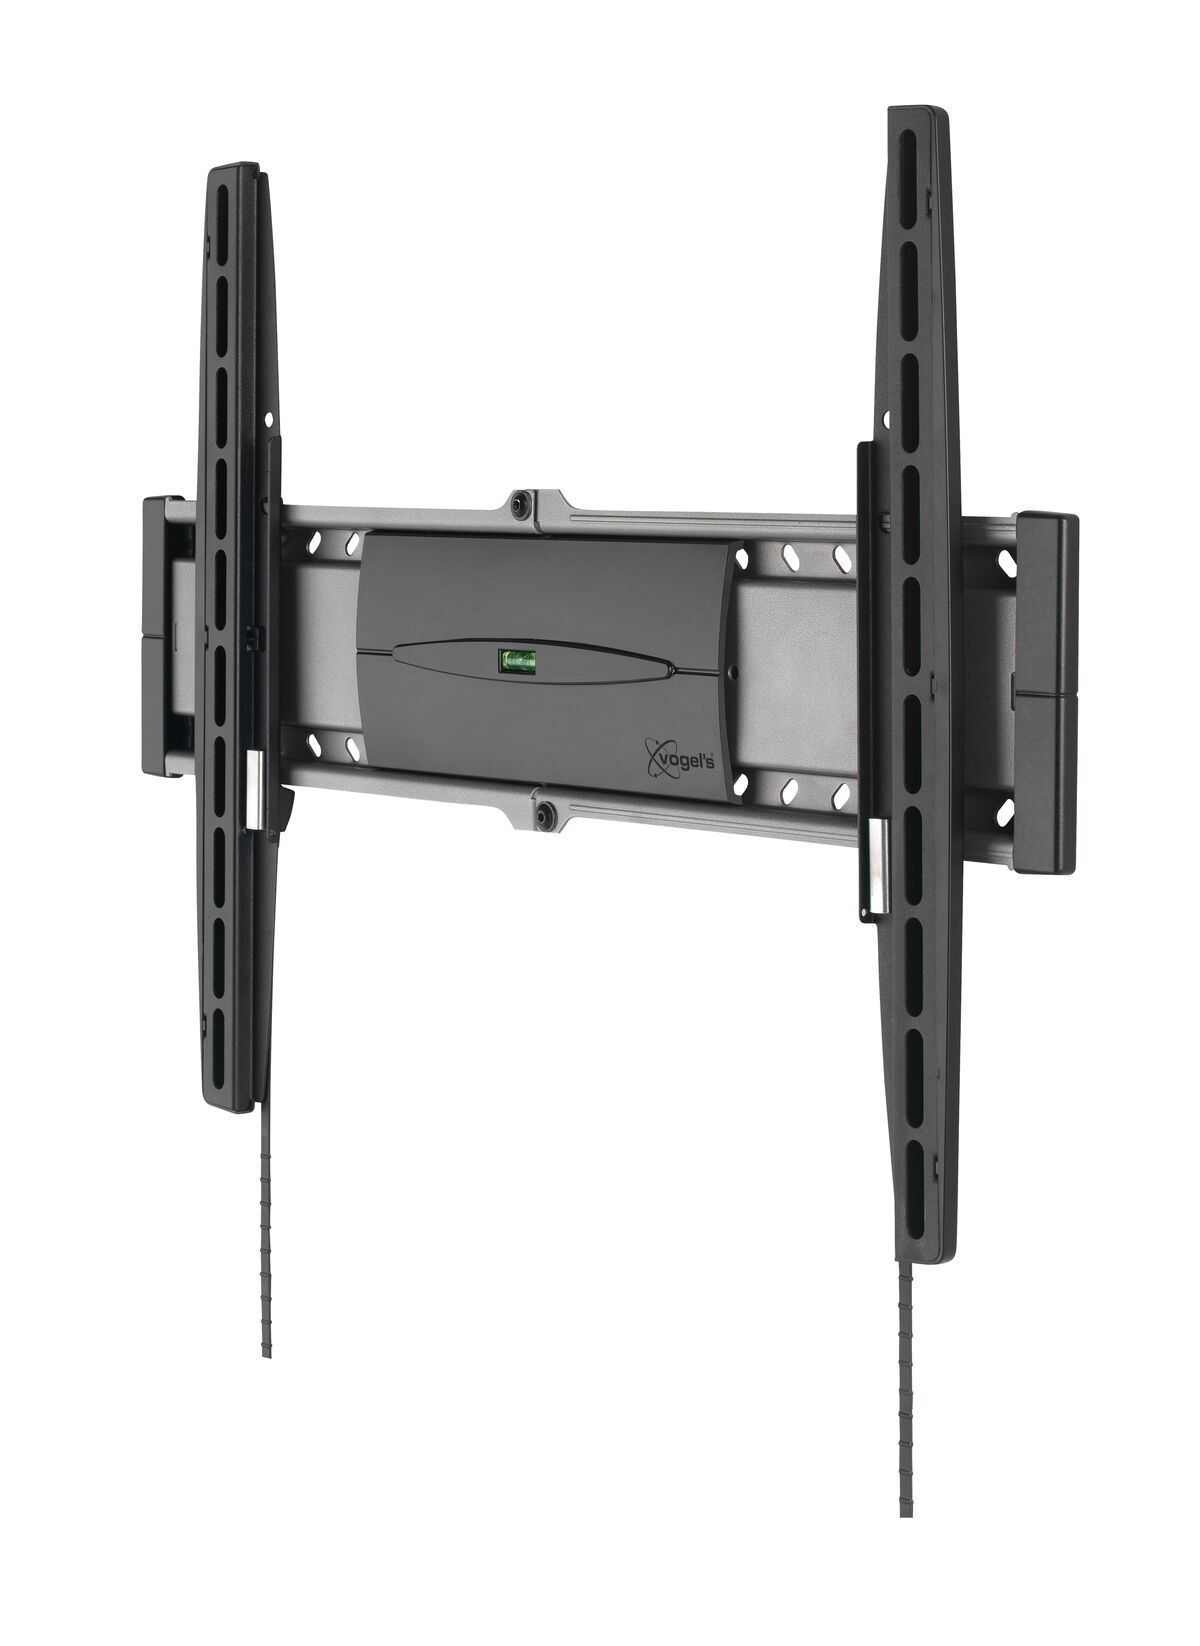 Vogel's EFW 8206 Fixed TV Wall Mount - Suitable for 32 up to 55 inch TVs up to Product